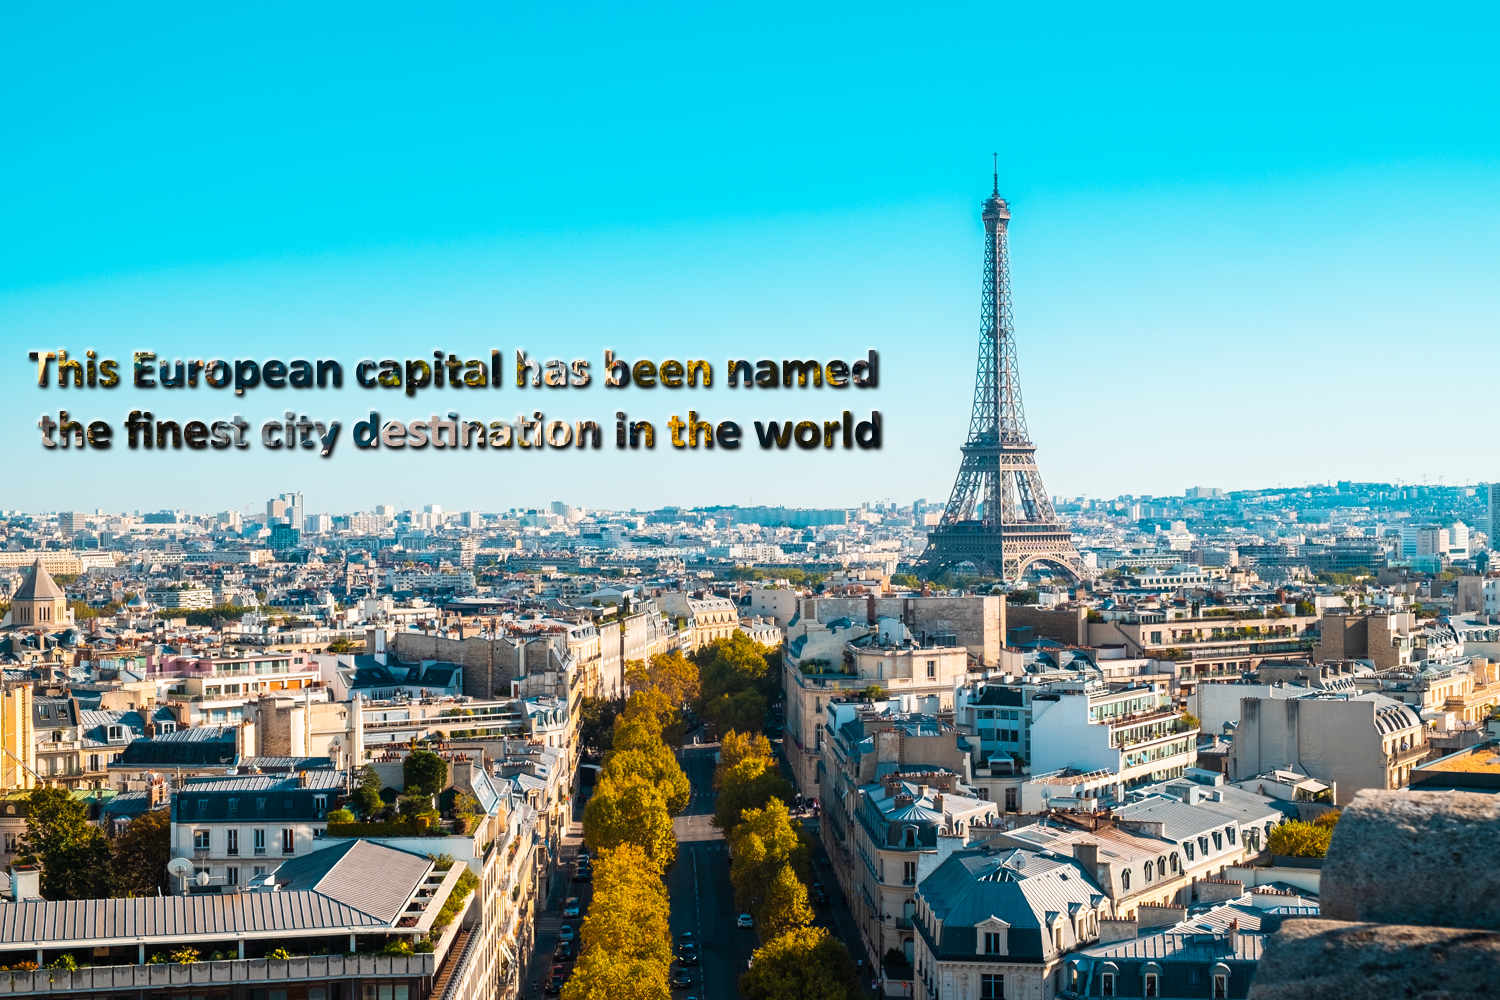 This European capital has been named the finest city destination in the world.